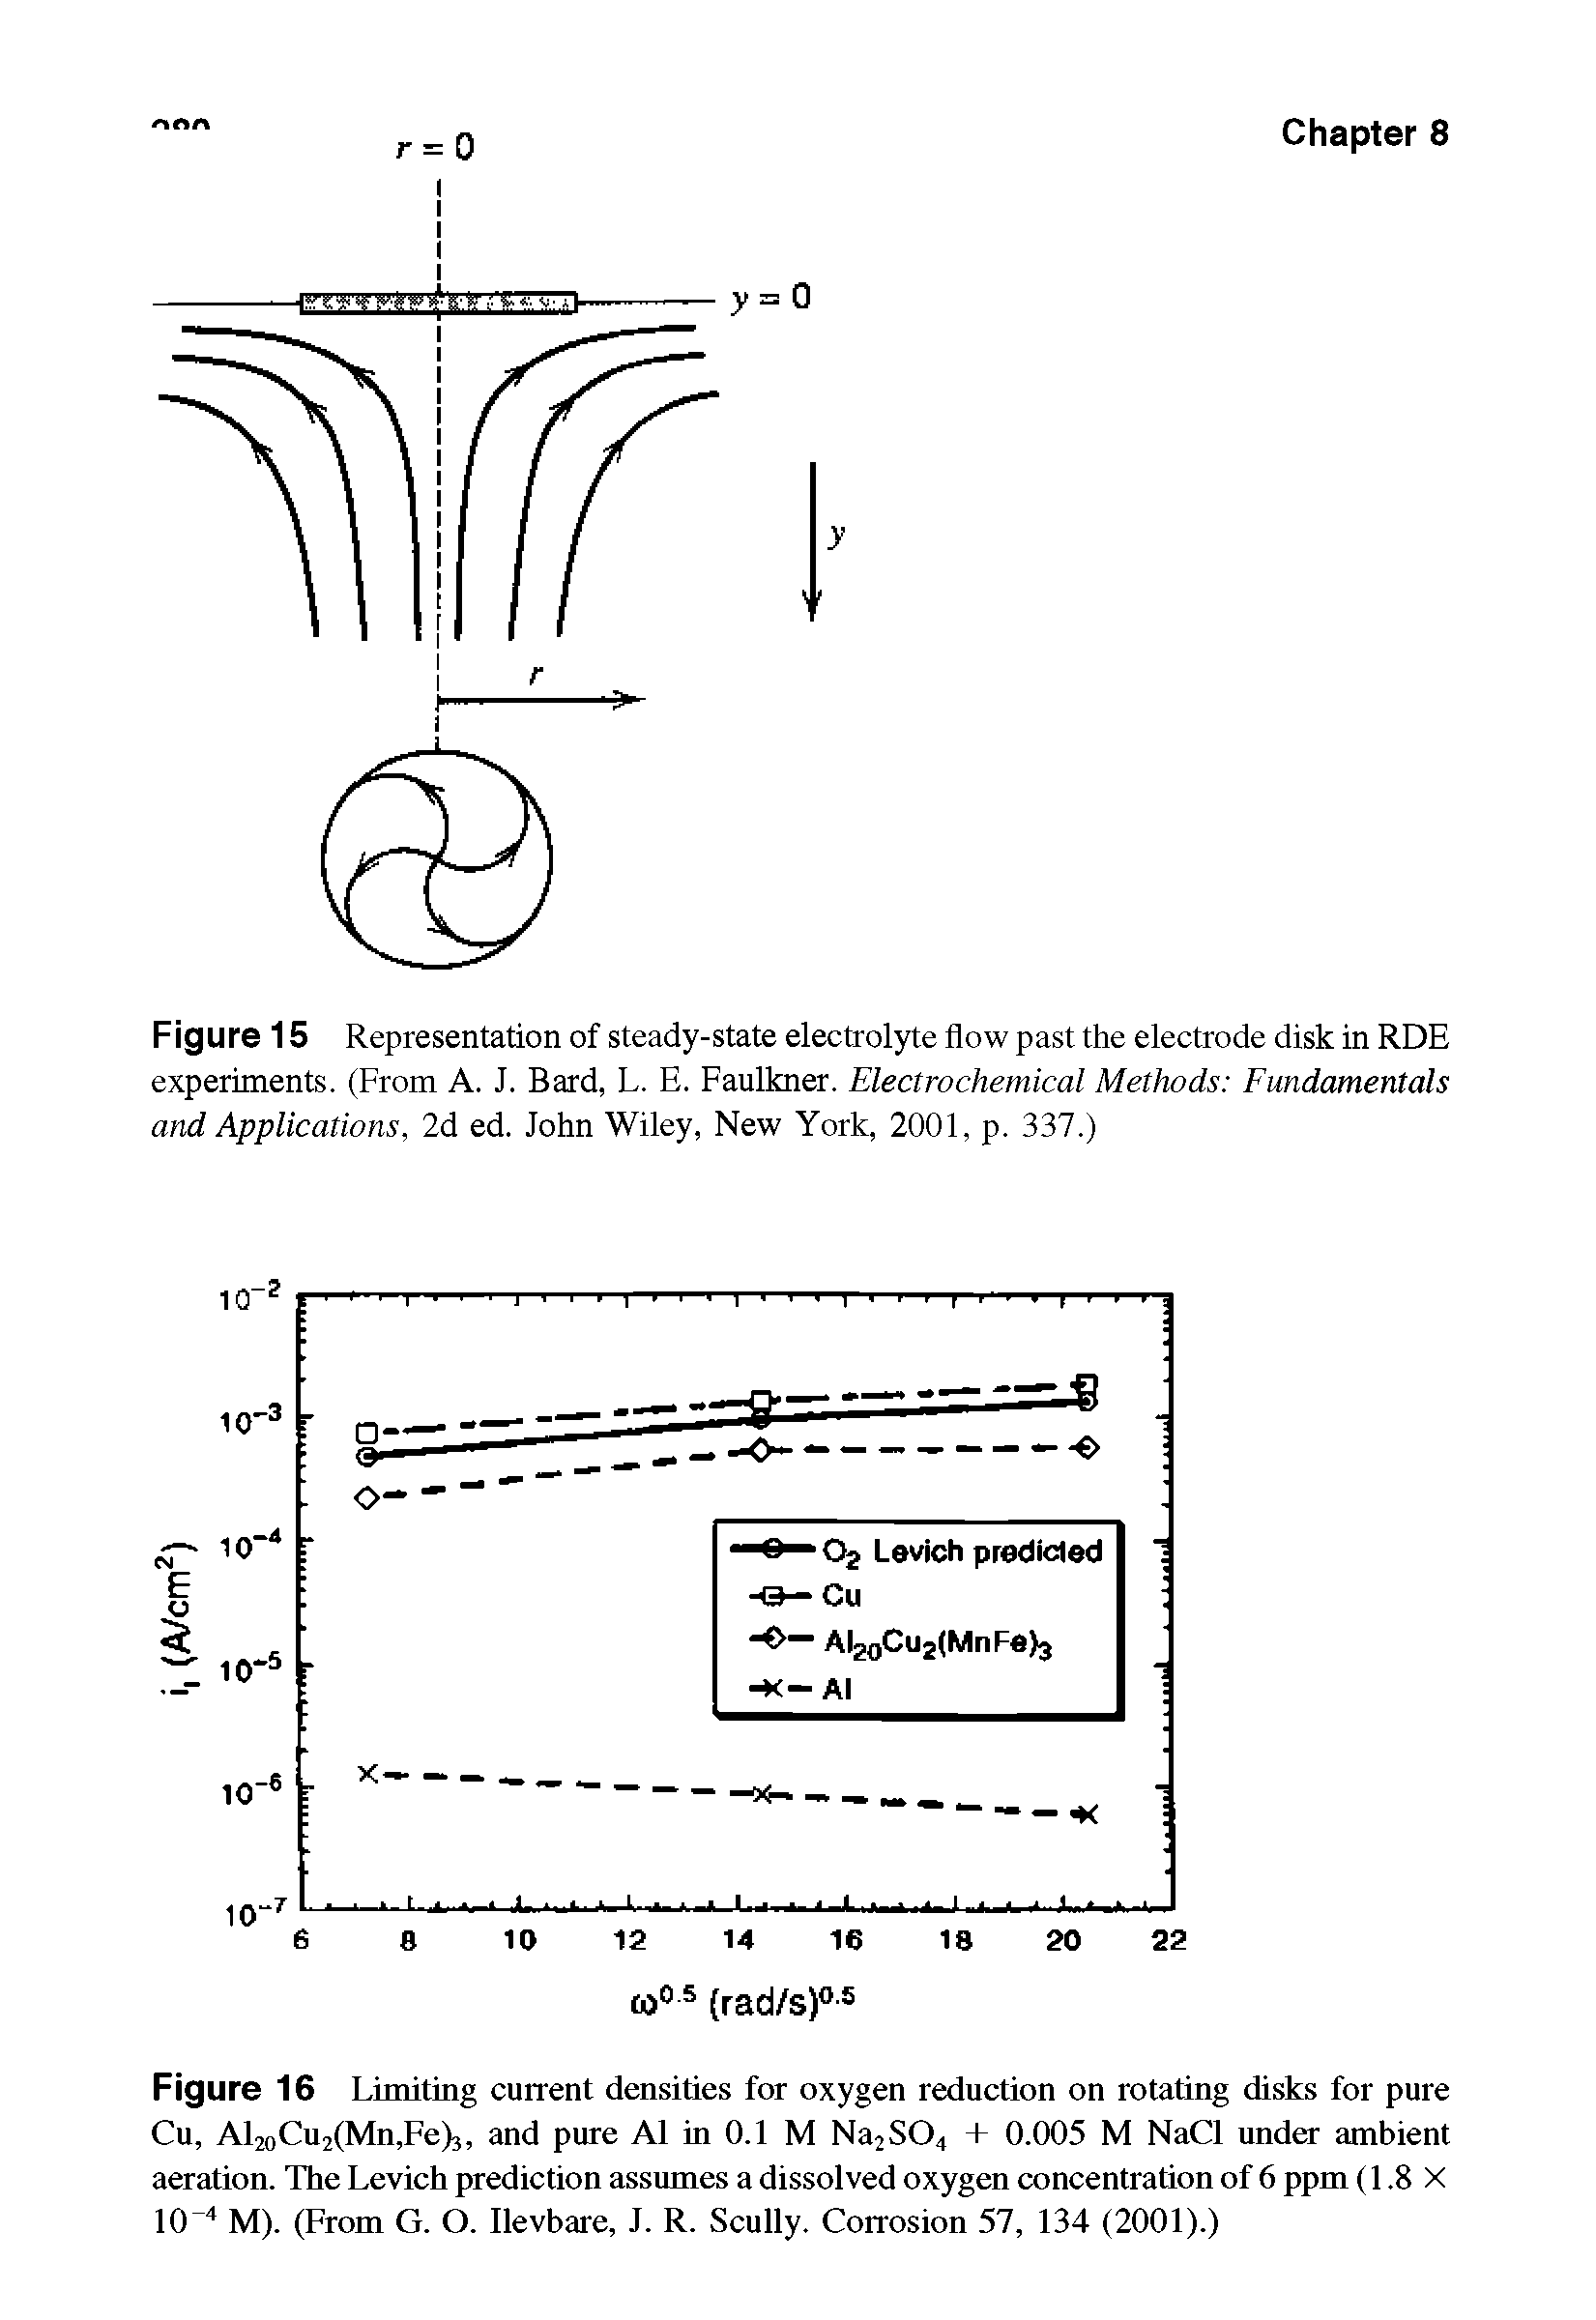 Figure 16 Limiting current densities for oxygen reduction on rotating disks for pure Cu, Al2oCu2(Mn,Fe)3, and pure A1 in 0.1 M Na2S04 + 0.005 M NaCl under ambient aeration. The Levich prediction assumes a dissolved oxygen concentration of 6 ppm (1.8 X 10 4 M). (From G. O. Ilevbare, J. R. Scully. Corrosion 57, 134 (2001).)...